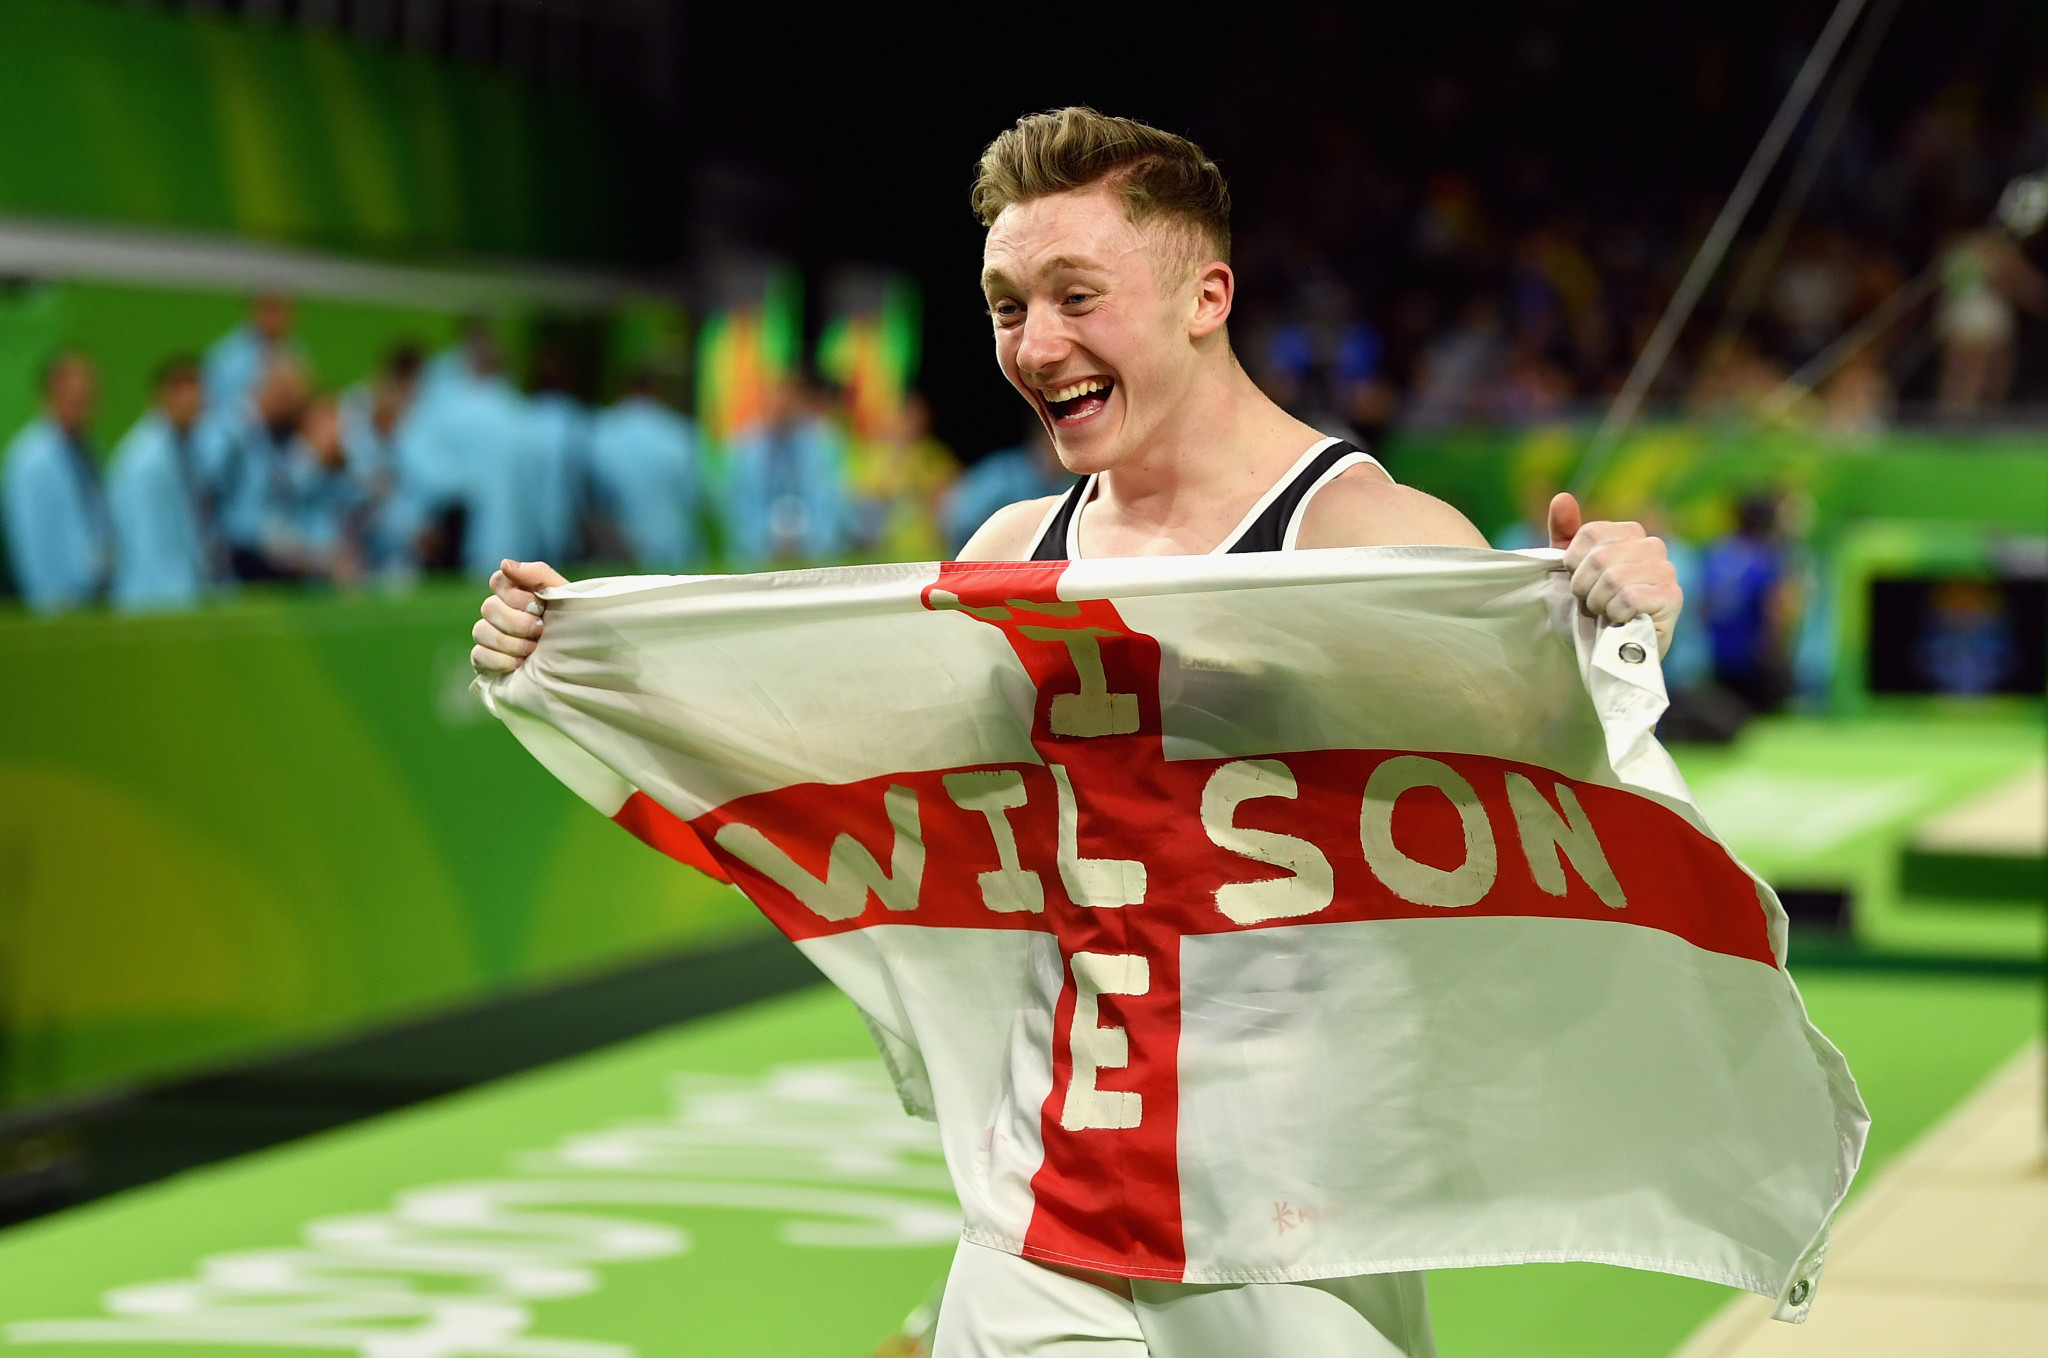 Nile Wilson secured the men's all-around individual title ©Getty Images